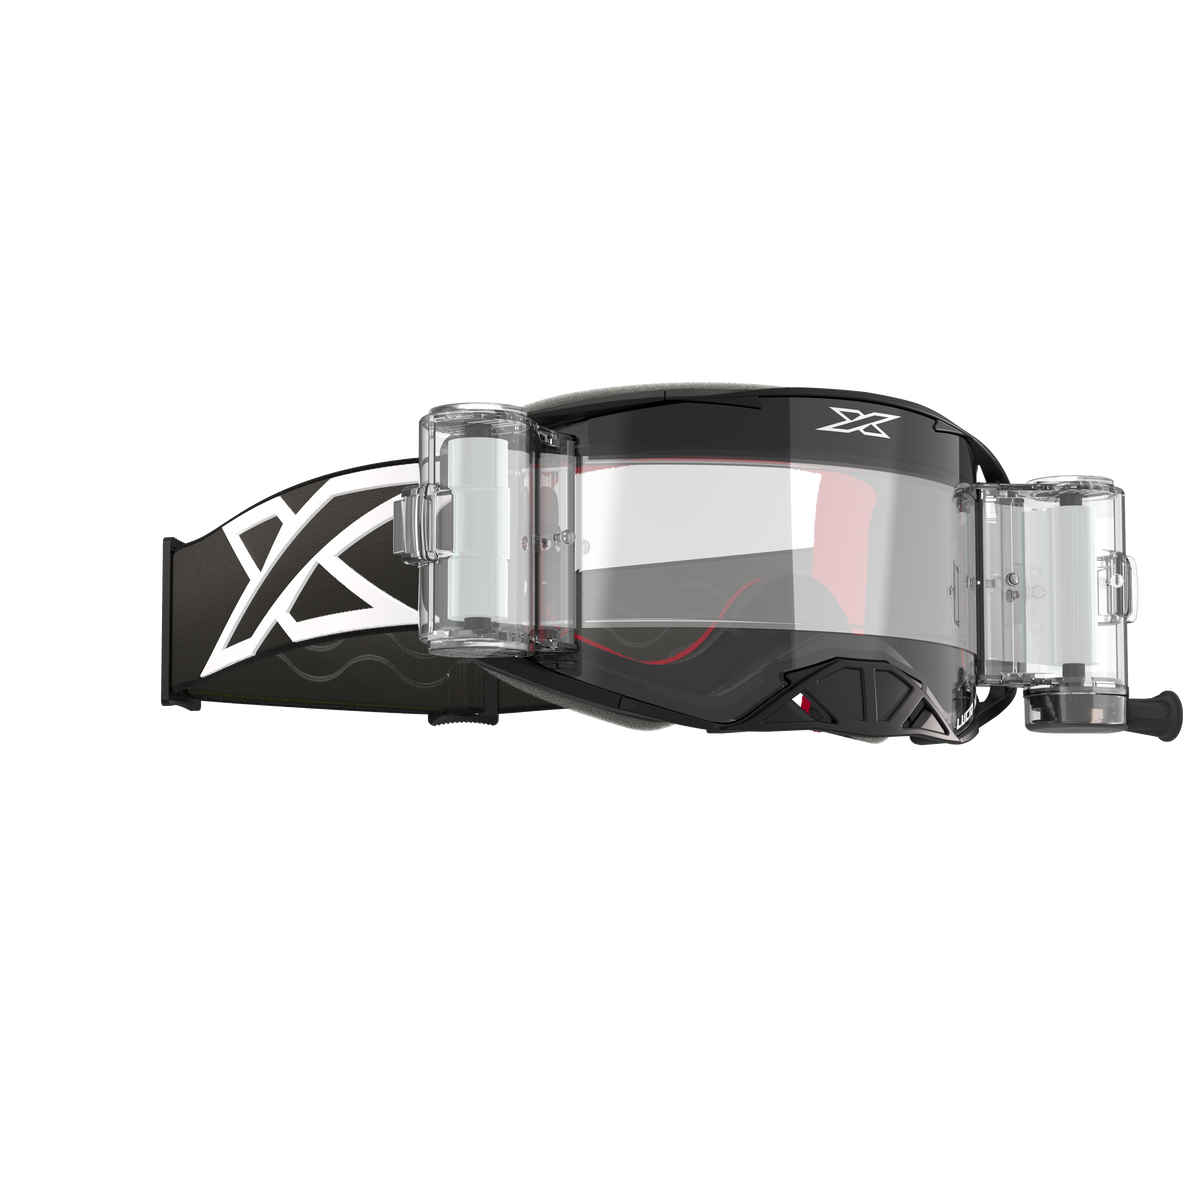 Lucid Goggle Race Pack Black &amp; White - Zip Off